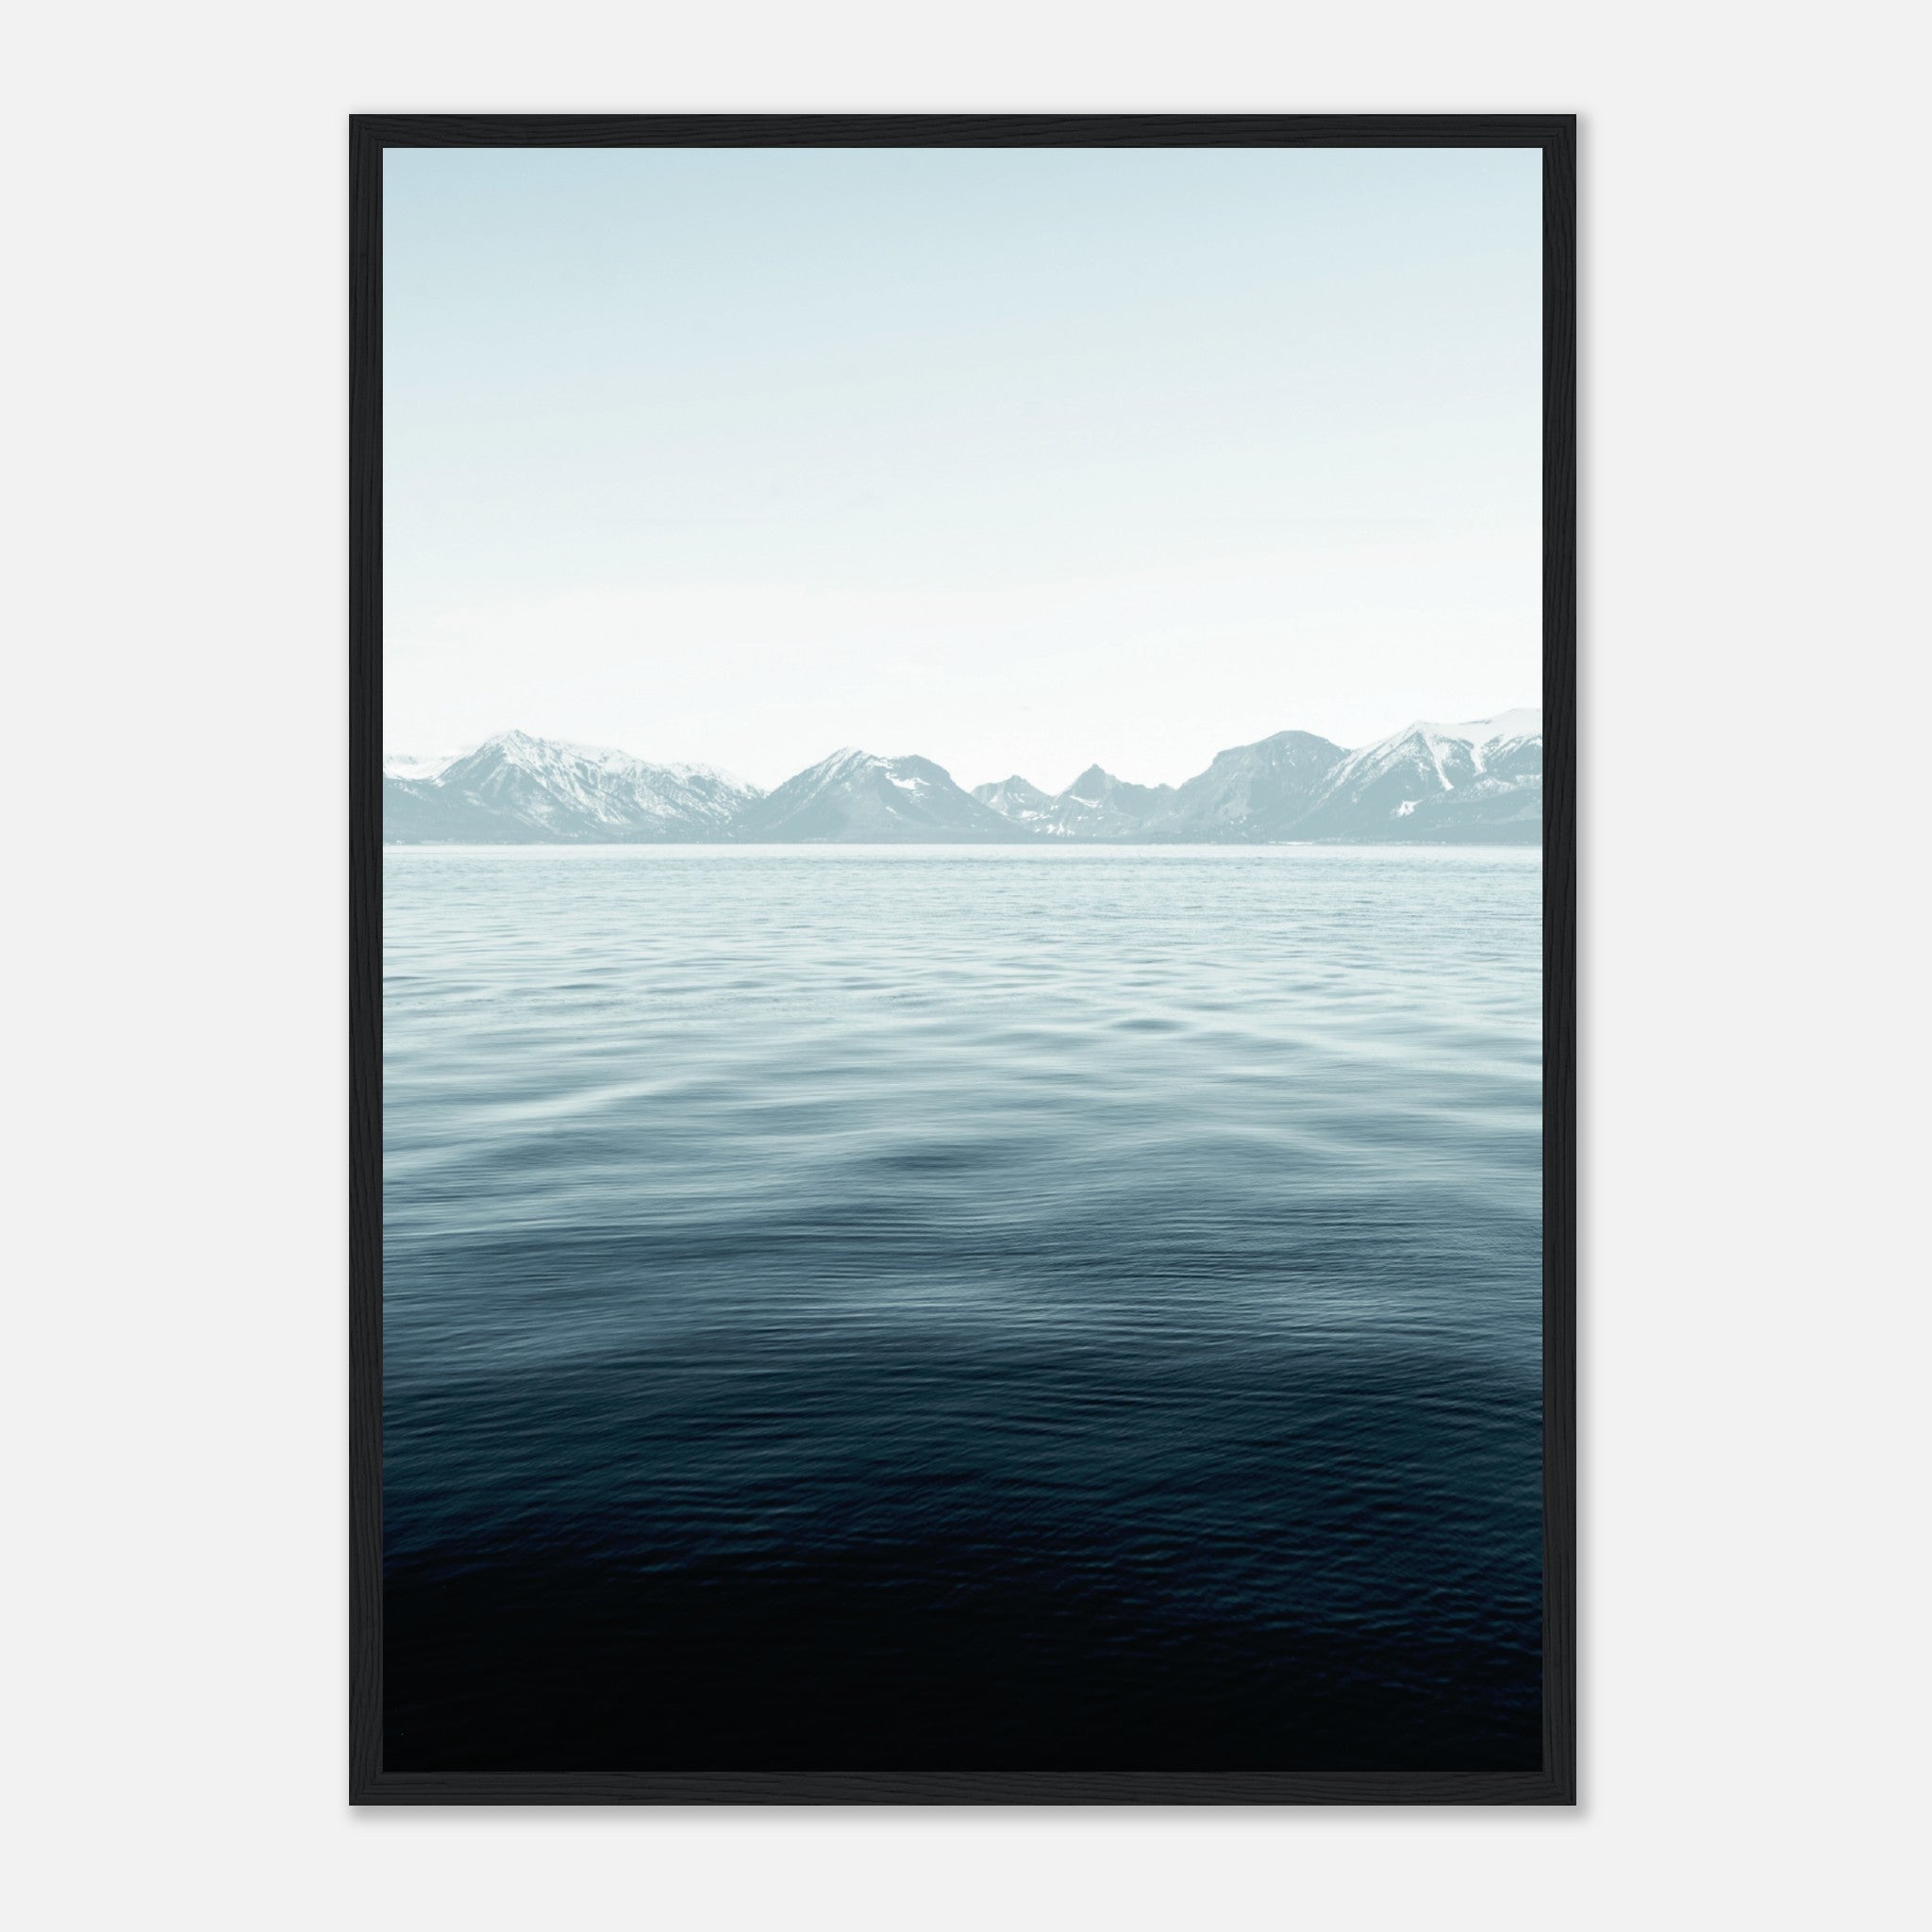 Wavy Lake With Mountain Range In The Distance Poster